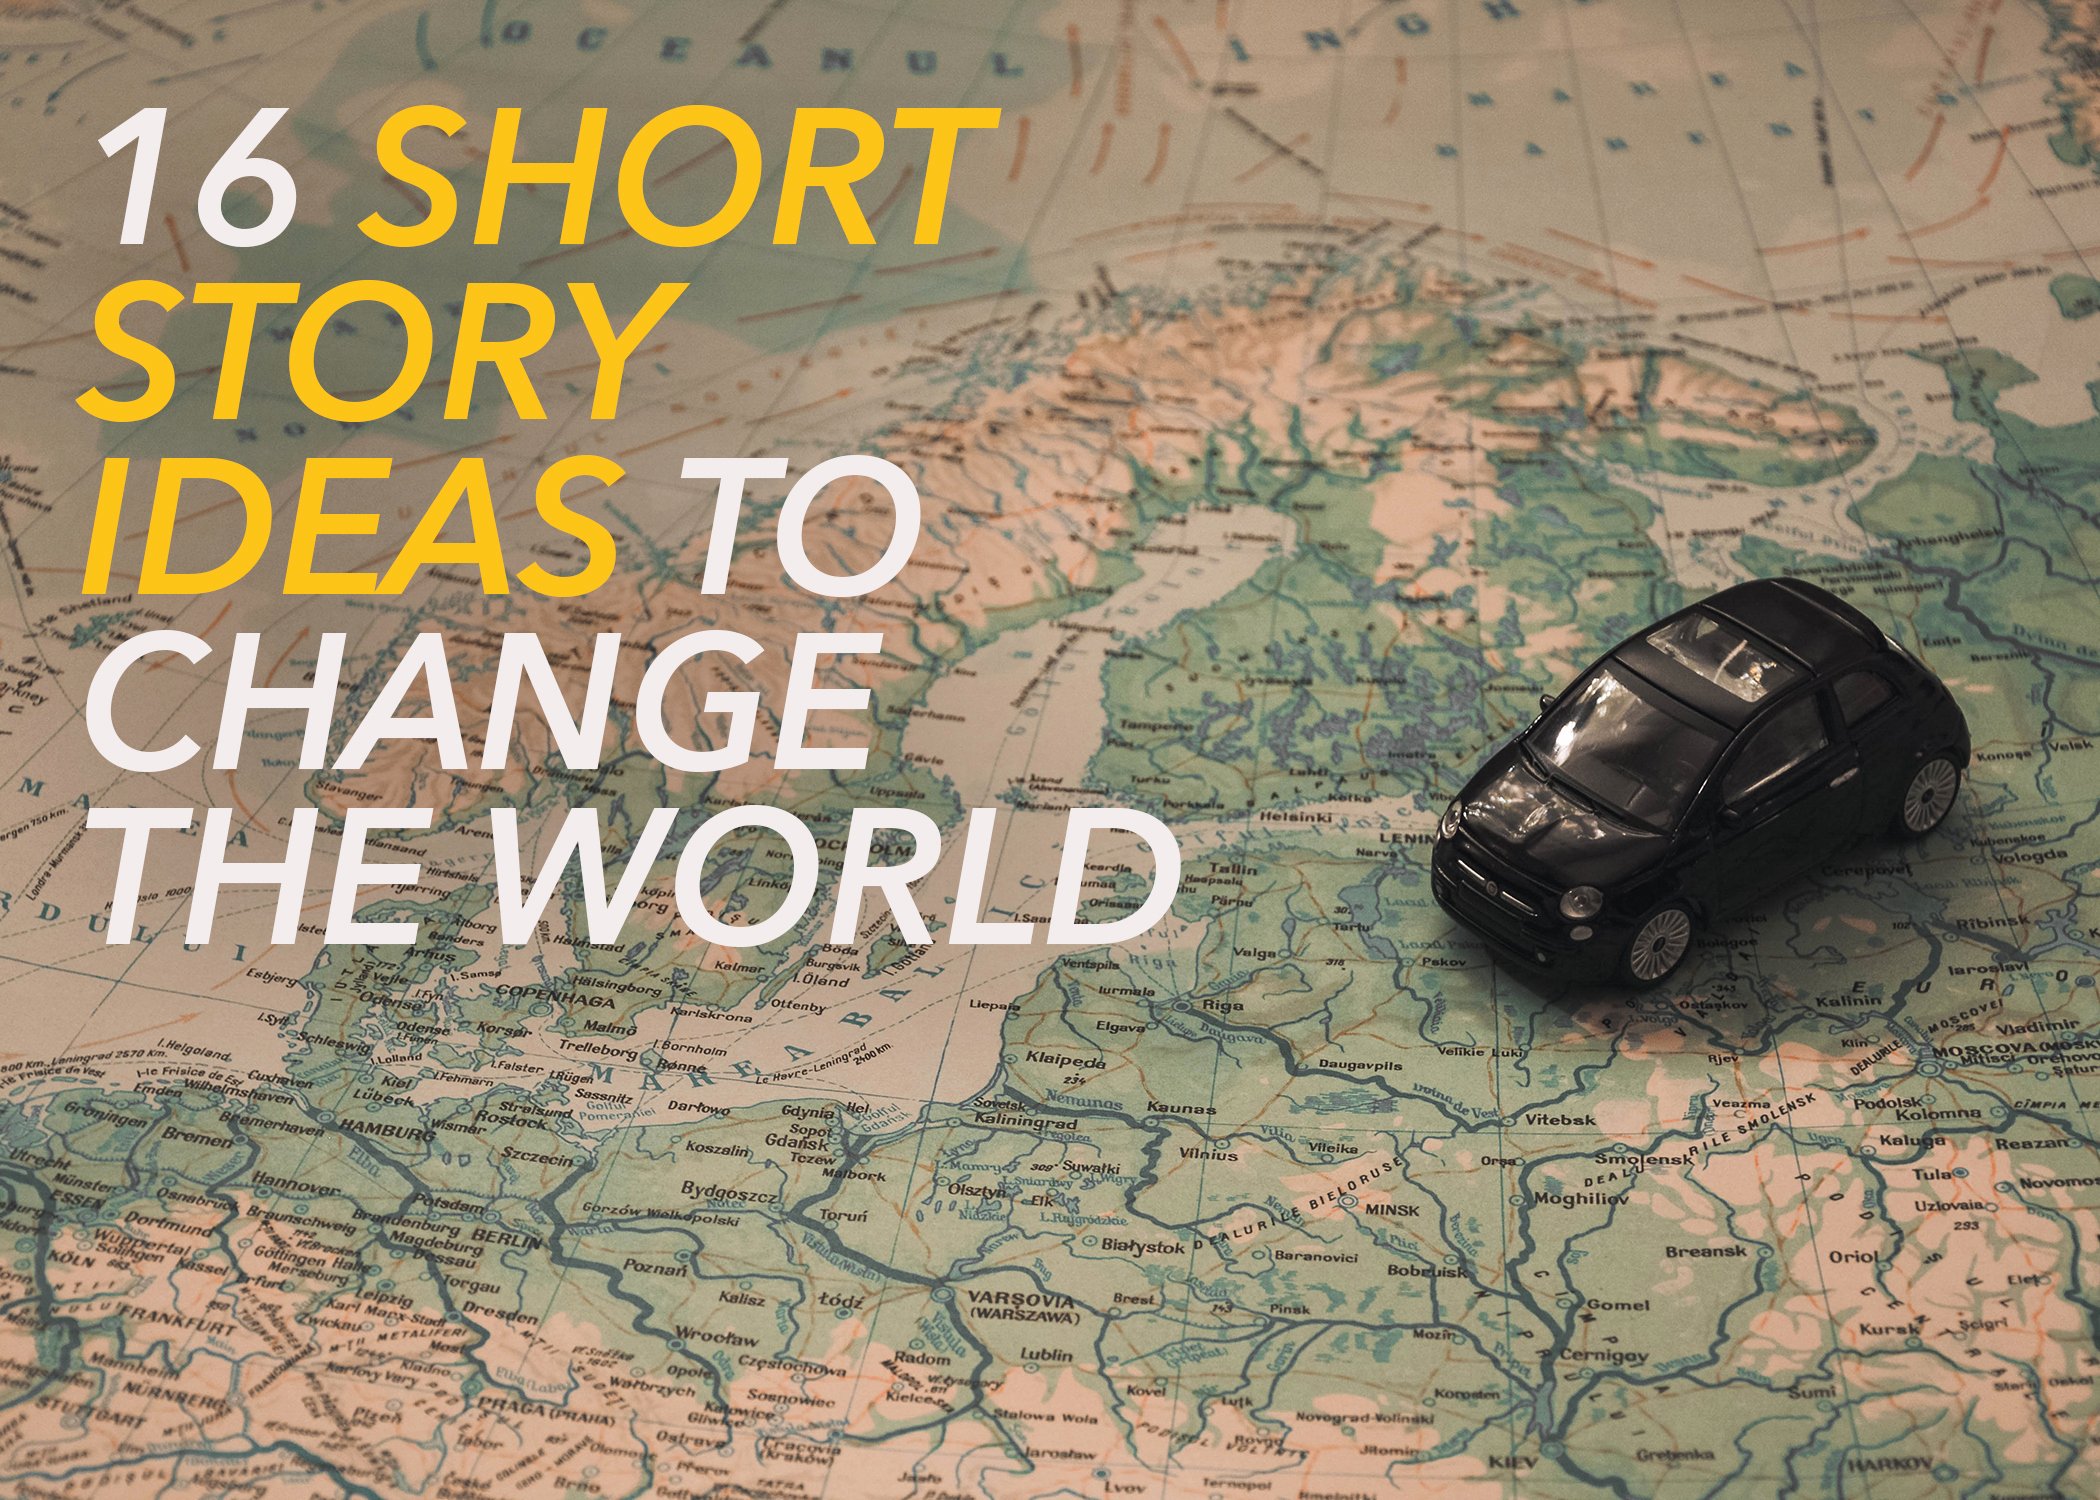 Short Story Essay Ideas Lovely 16 Short Story Ideas to Change the World